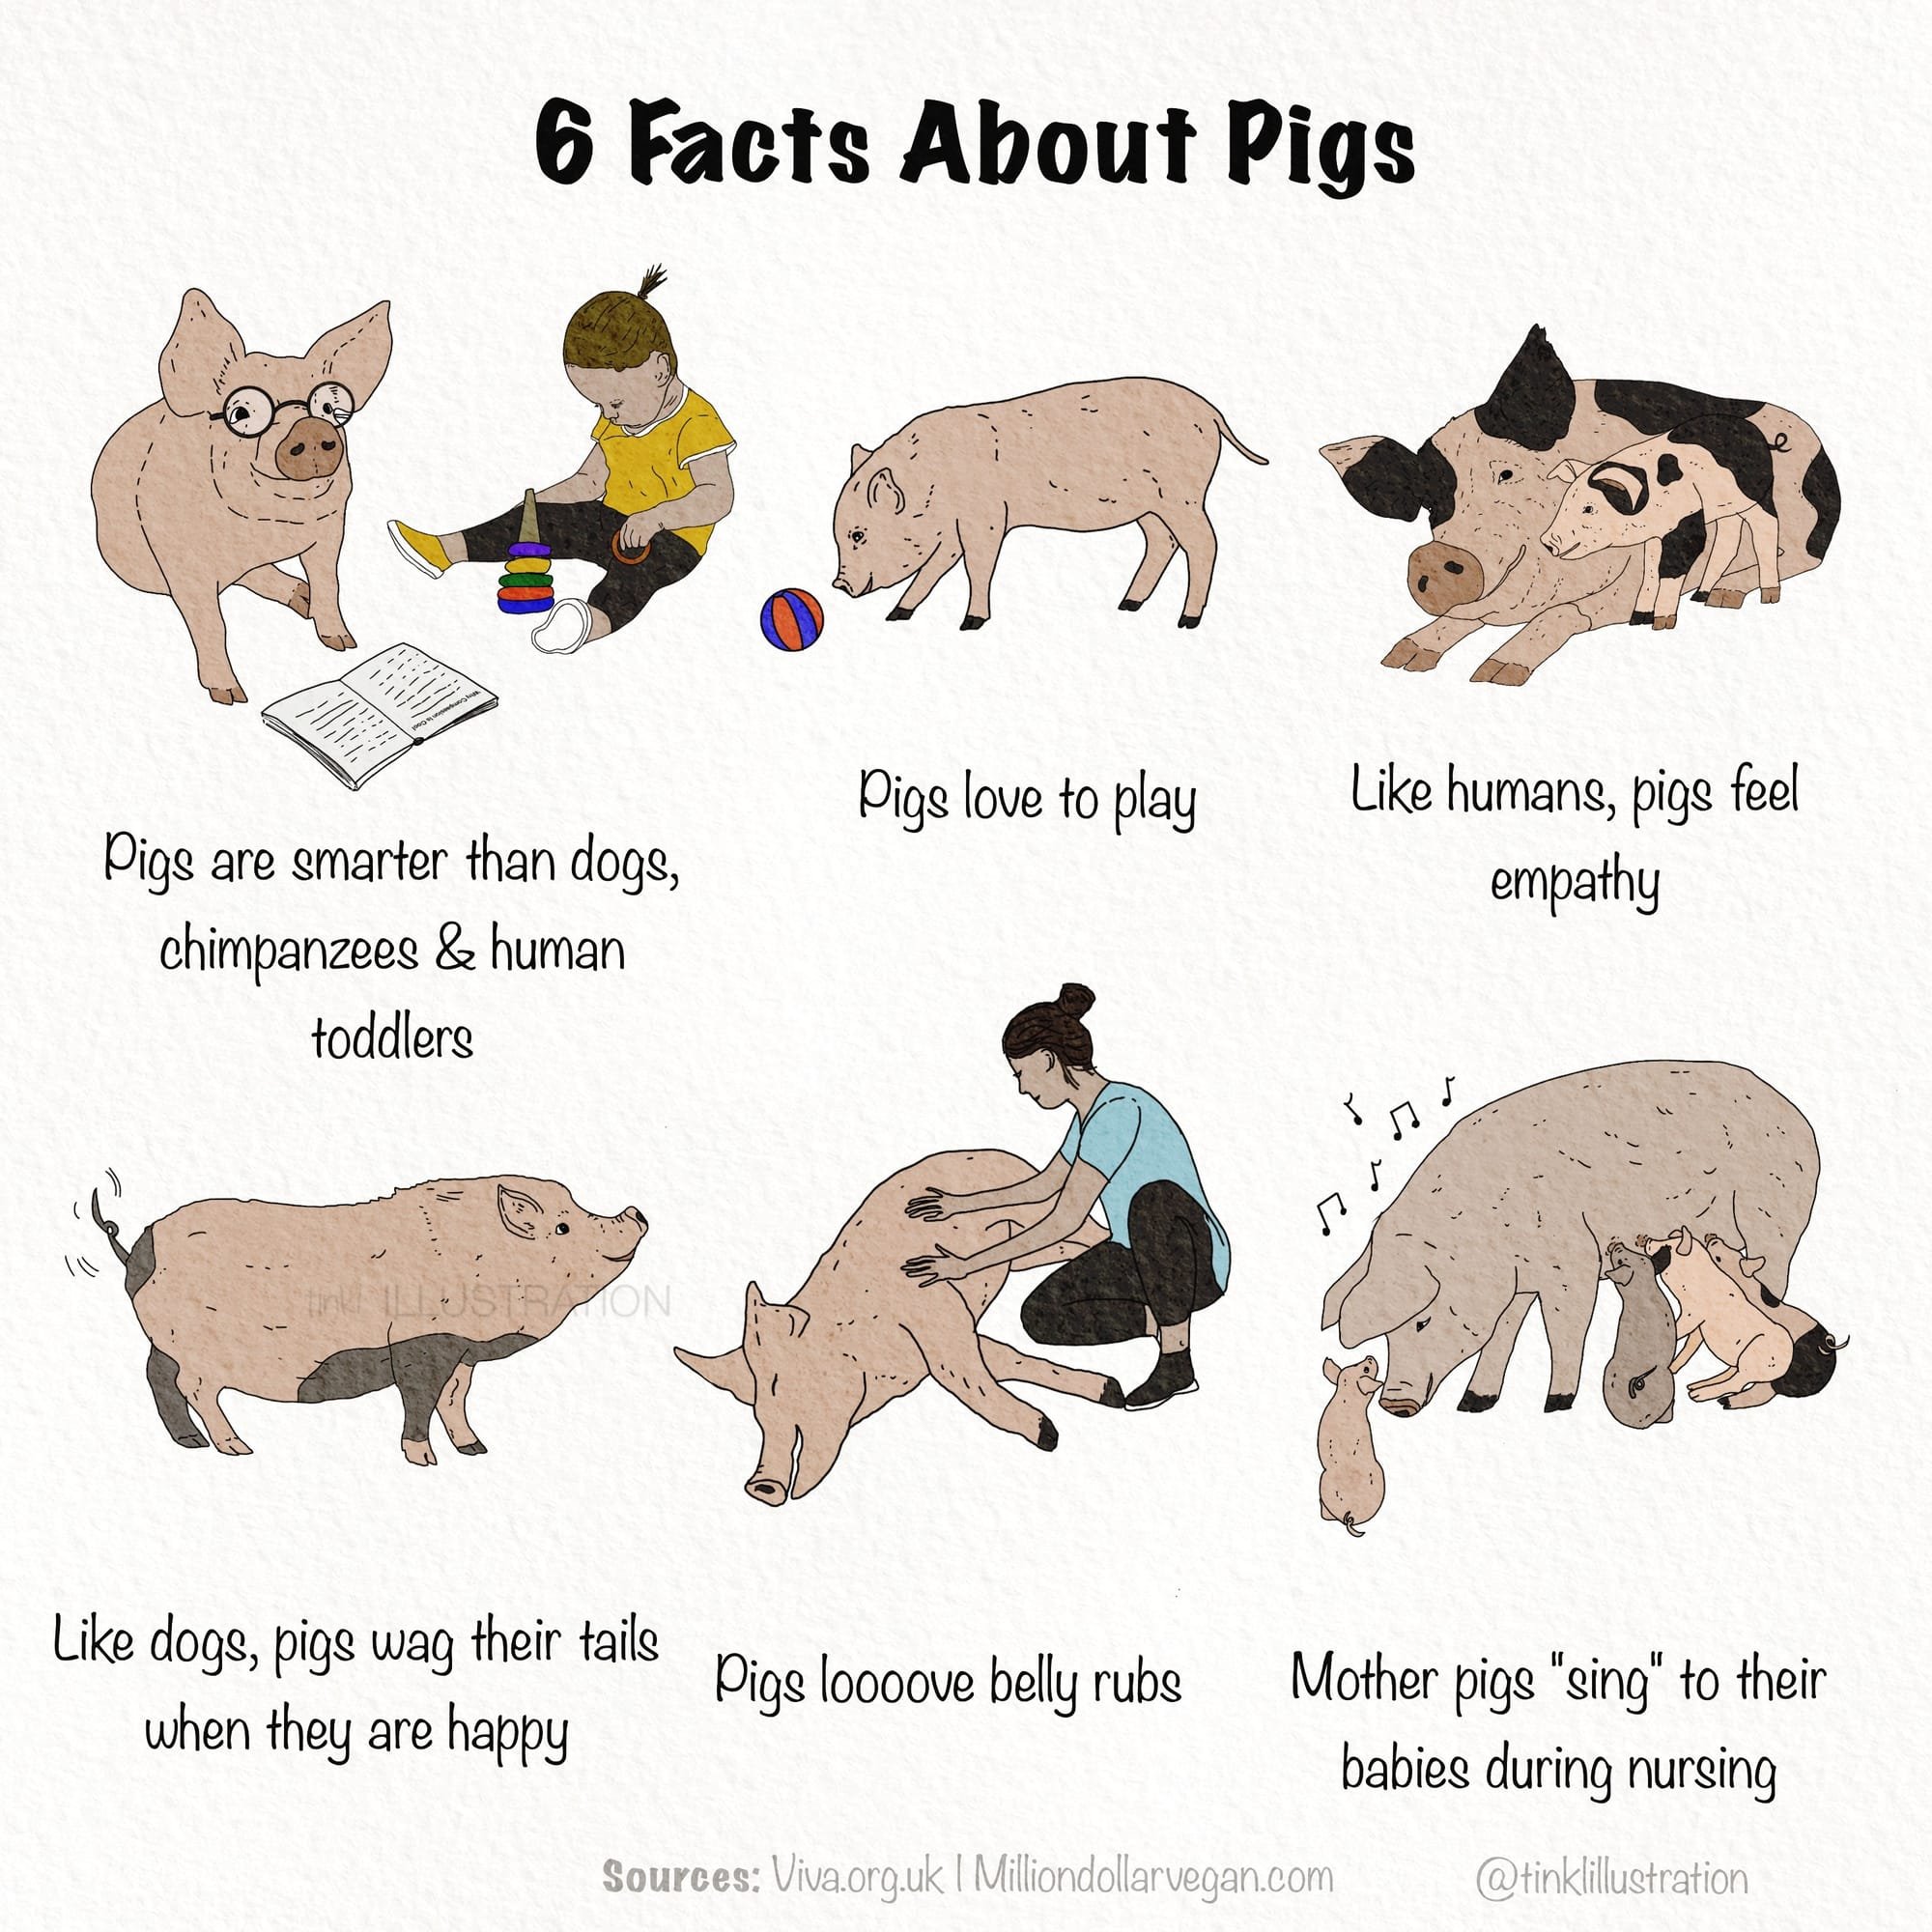 Instagram Infographic "6 Facts About Pigs"